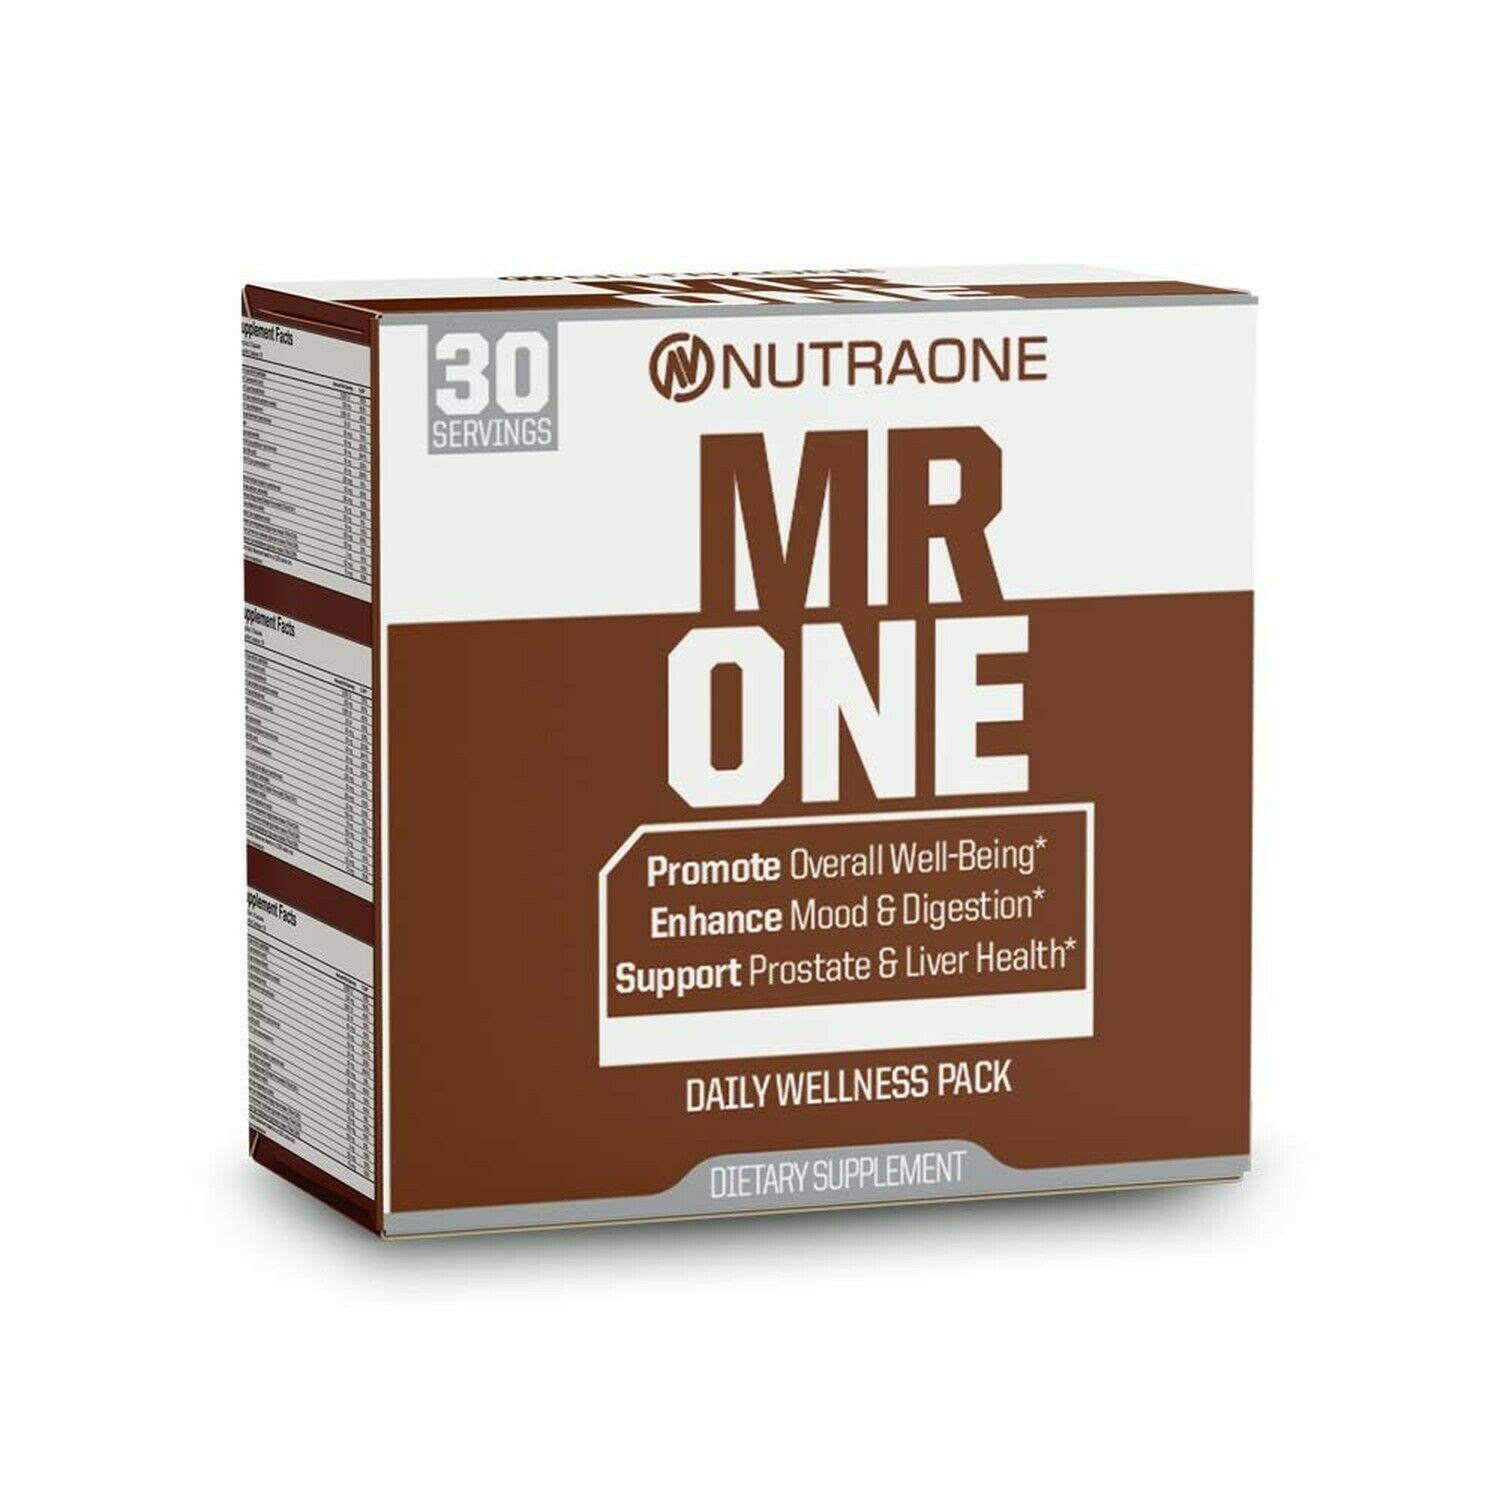 Mrone Daily Vitamin Packs for Men by NutraOne Mens Daily Vitamins and Supplements Regimen (30 Day Supply)